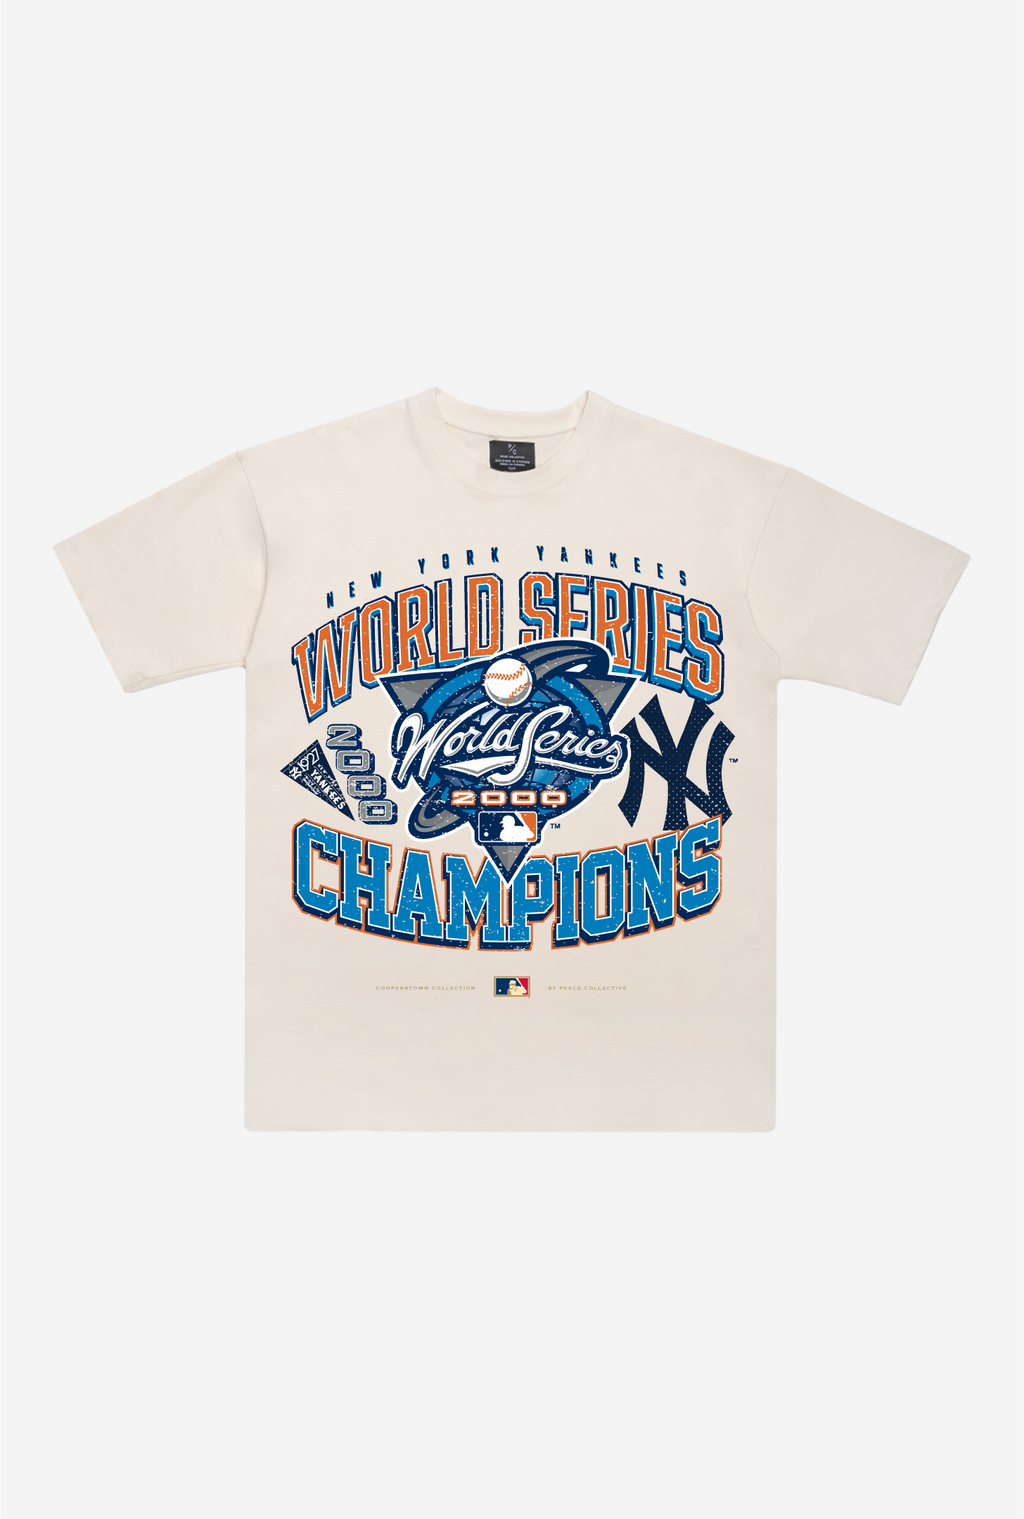 New York Yankees 120th Anniversary 1903 - 2023 Thank You For The Memories T- Shirt - Limited Edition - Torunstyle